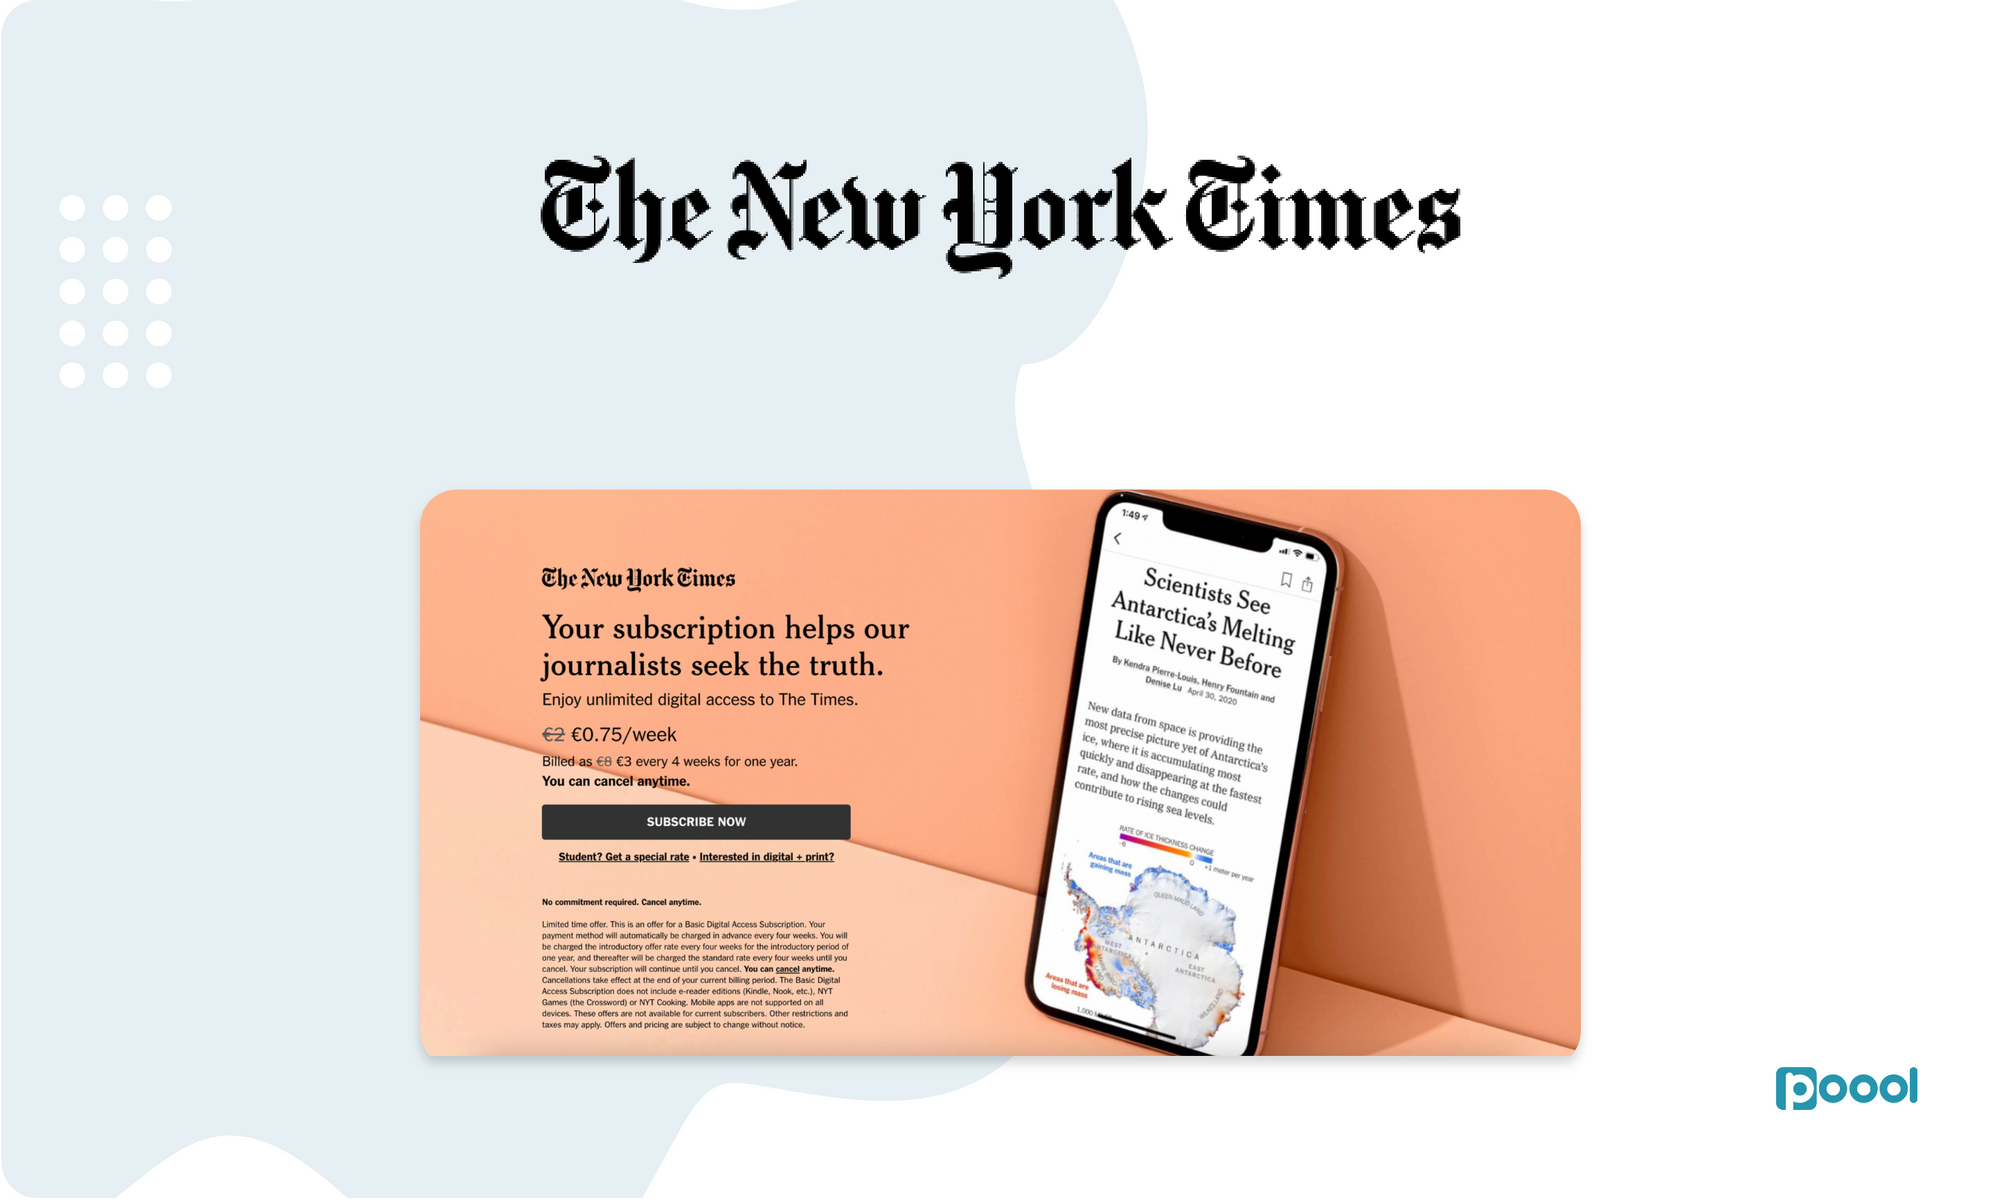 The New York Times Paywall: From Content, to Subscription to Content | Series.